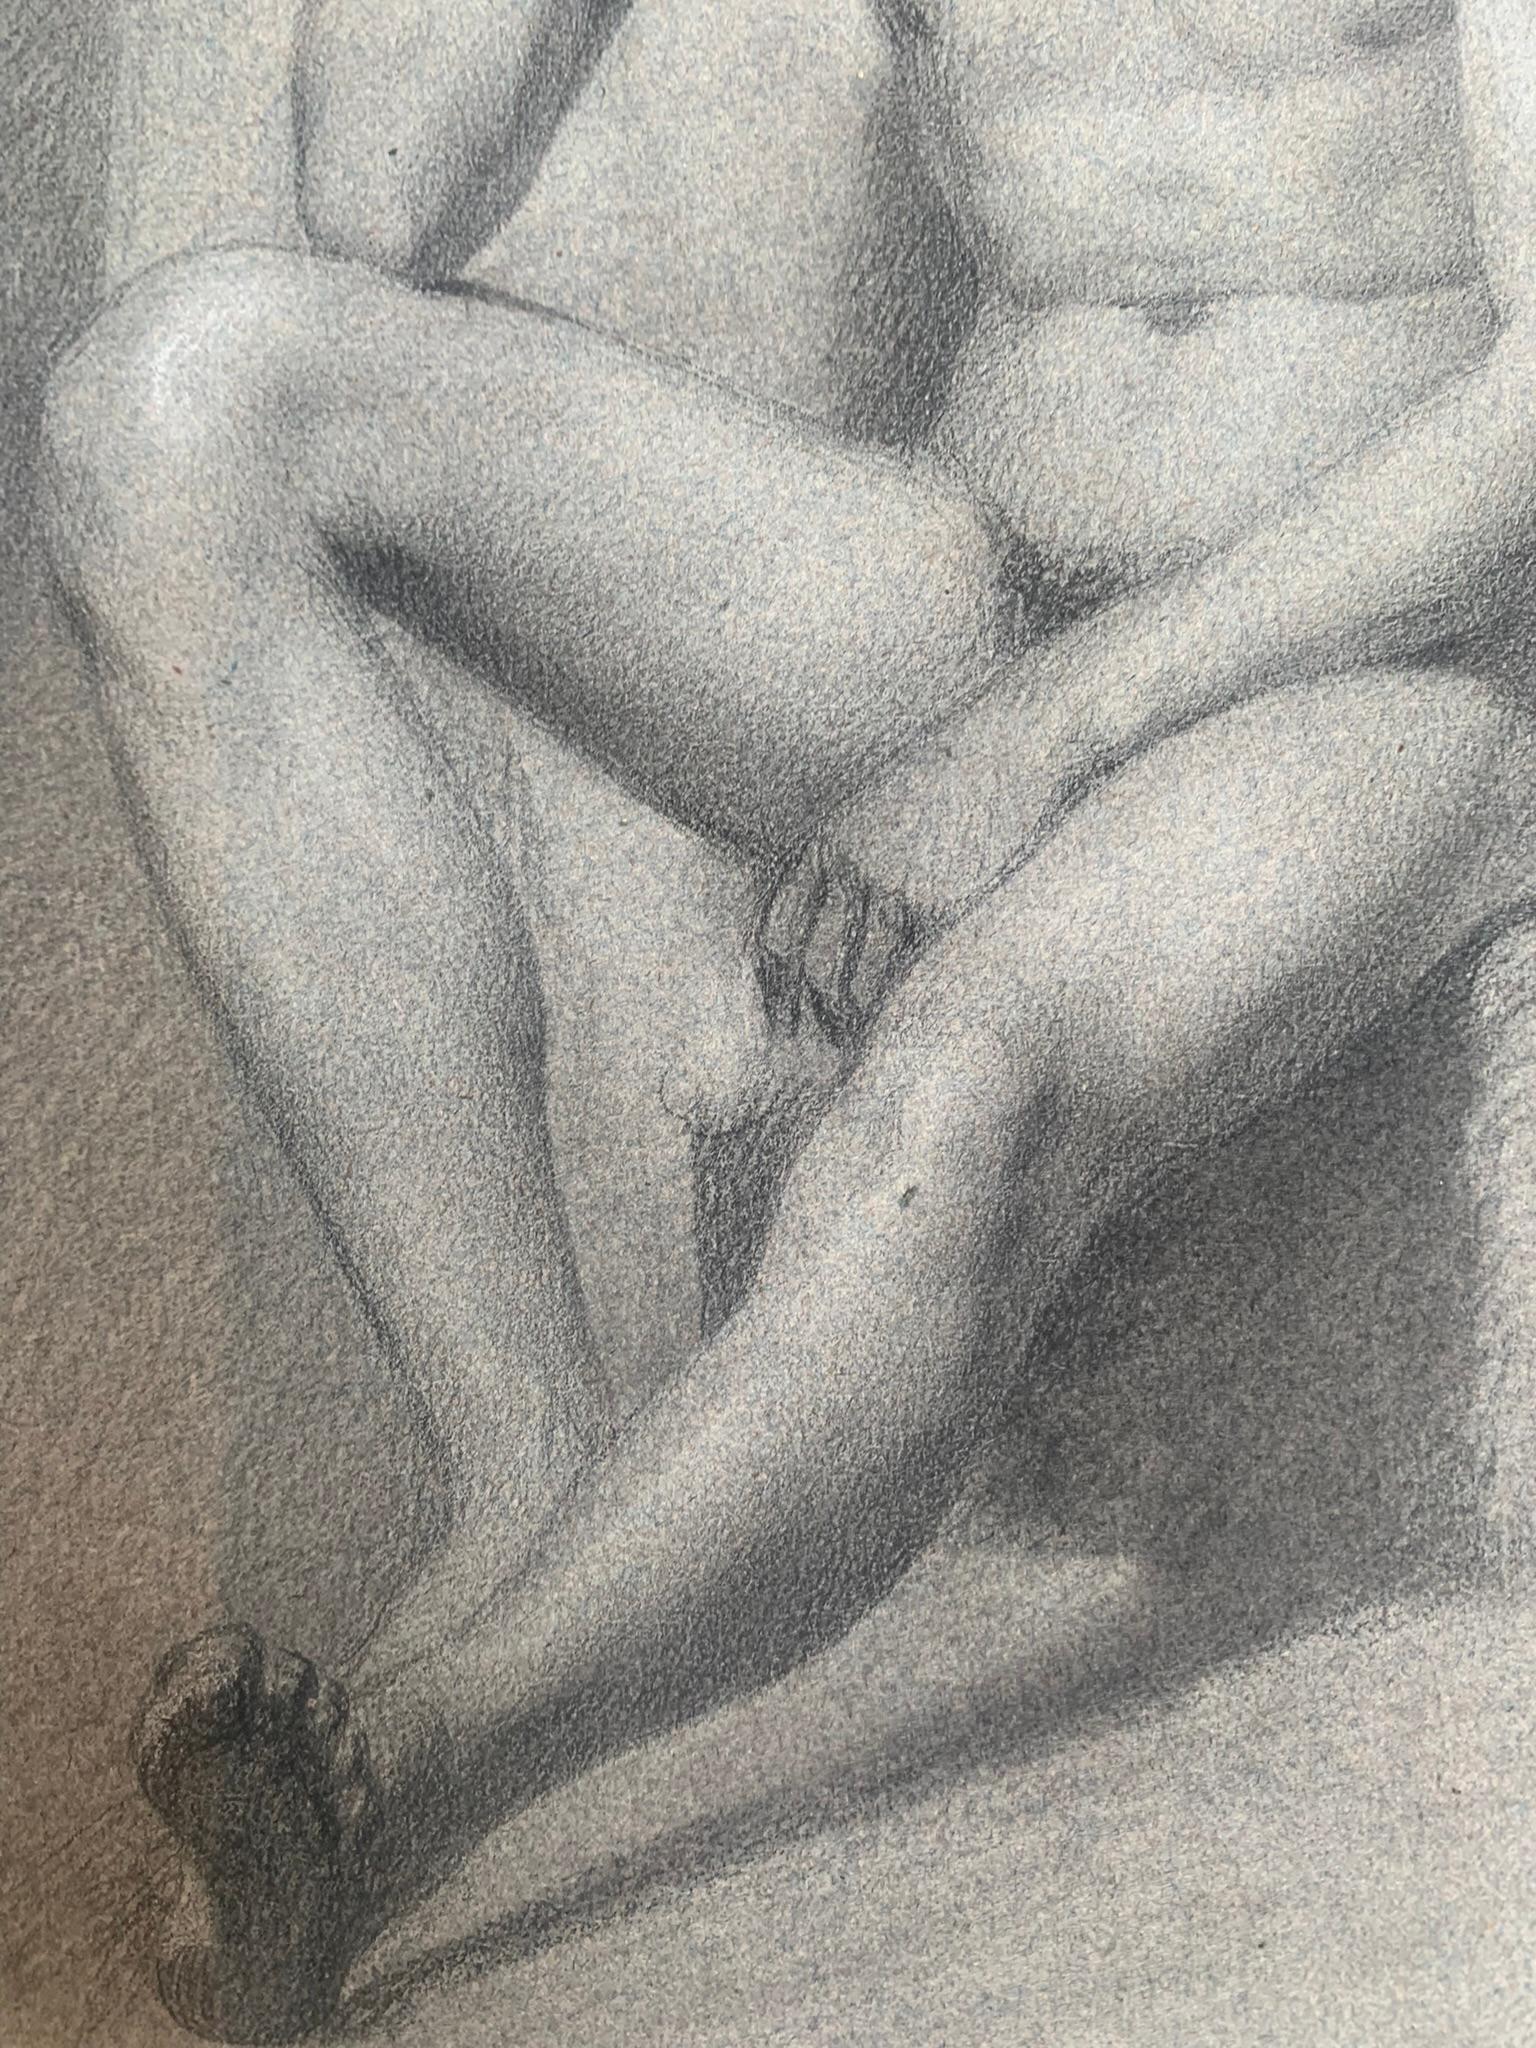 Academic Drawing. Figure Study of Young Sitting Nude Man. 19th Century. For Sale 2